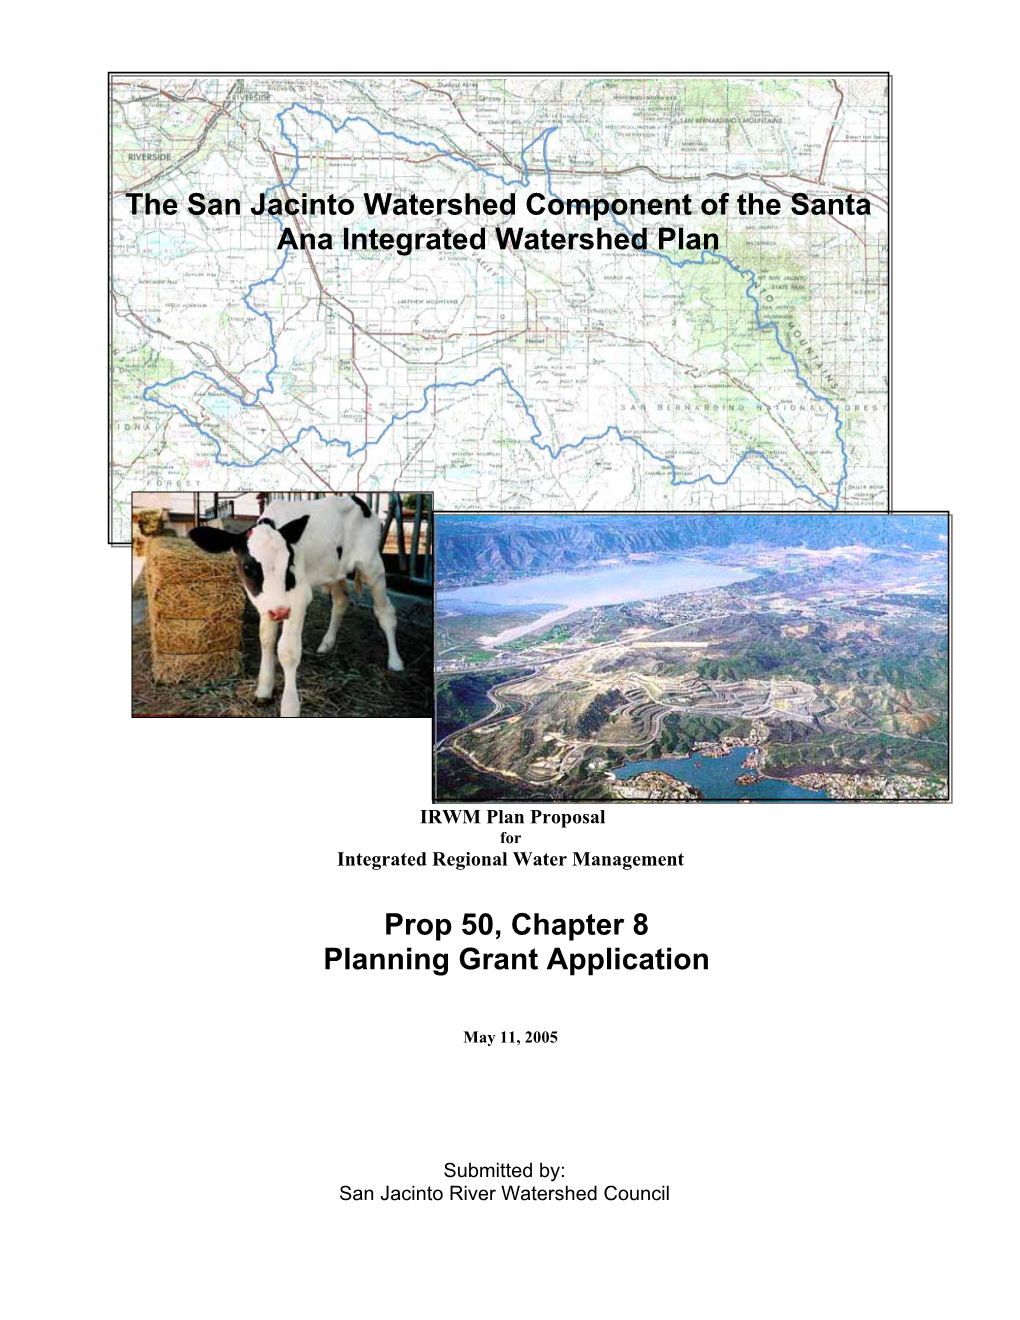 The San Jacinto Watershed Component of the Santa Ana Integrated Watershed Plan